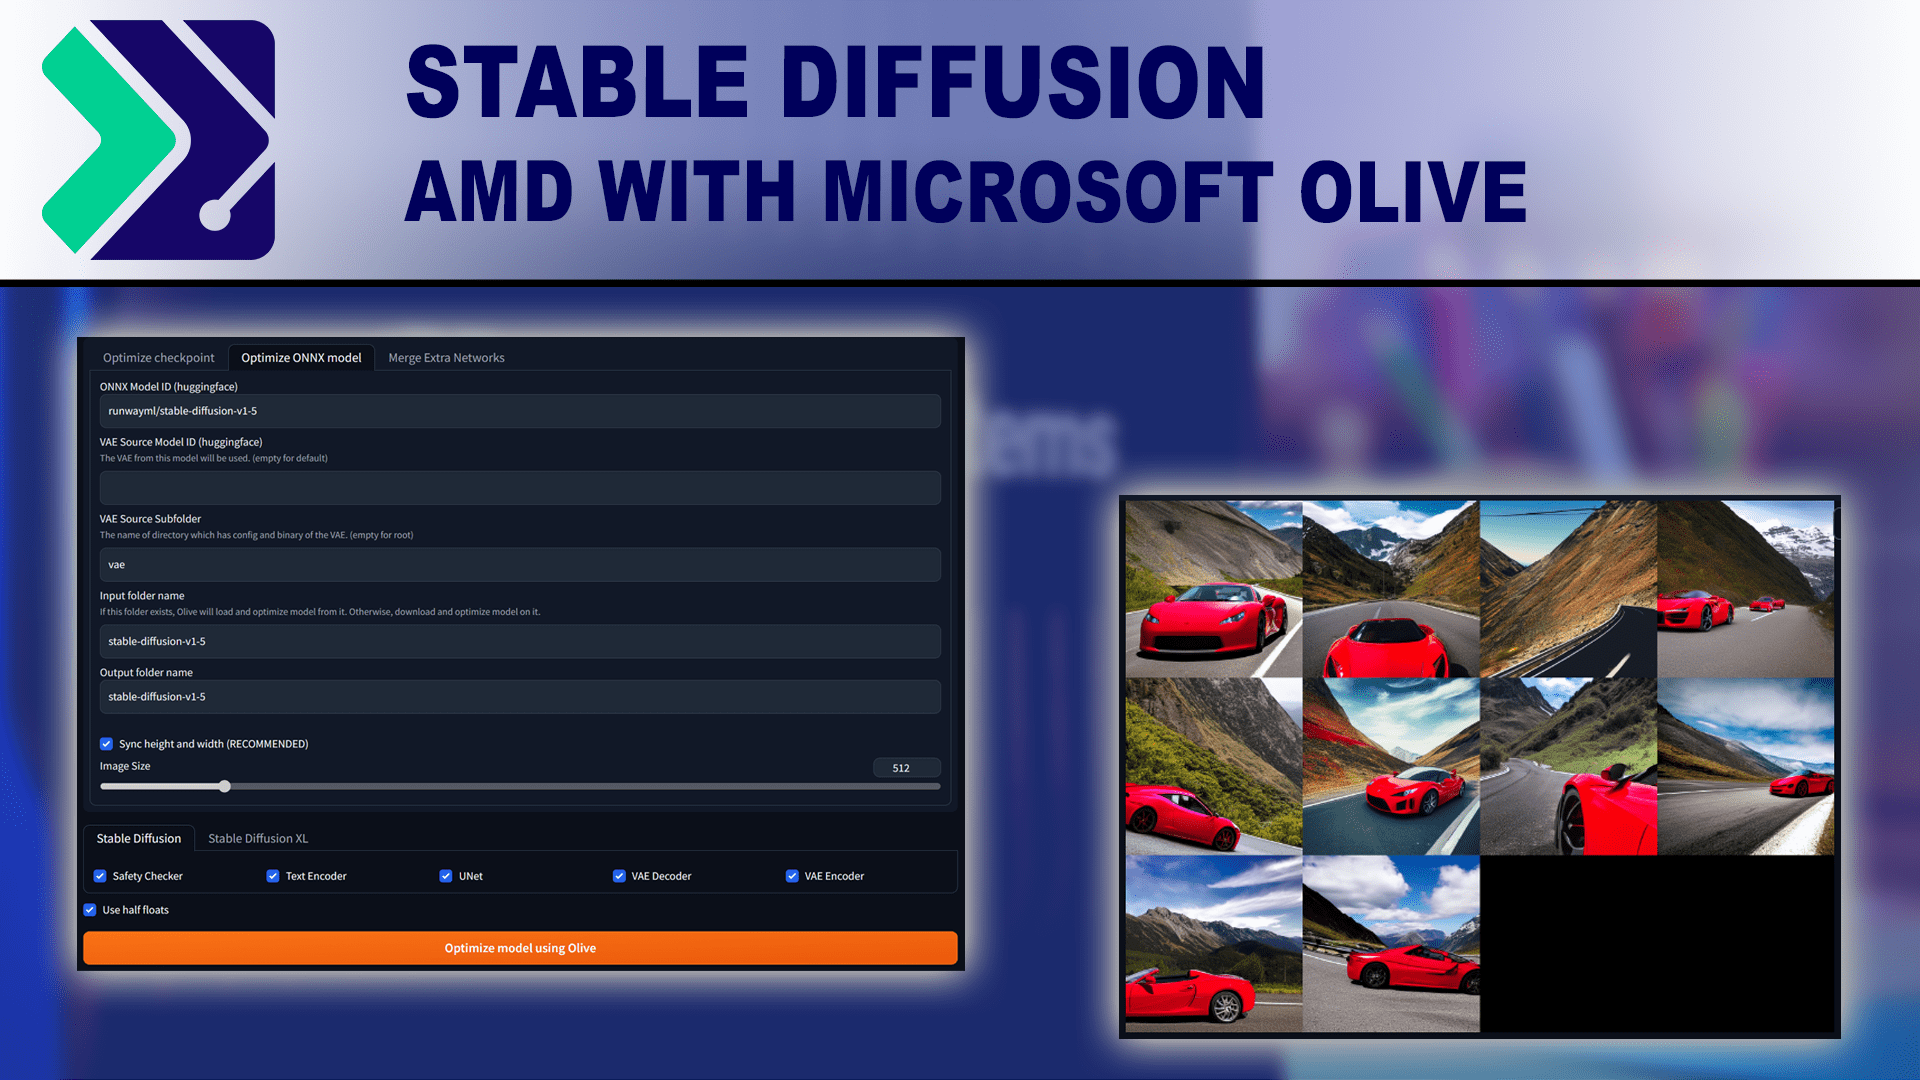 Featured-image-showing-AMD-Microsoft-Olive-Optimization-for-Stable-Diffusion-Automatic-1111.png